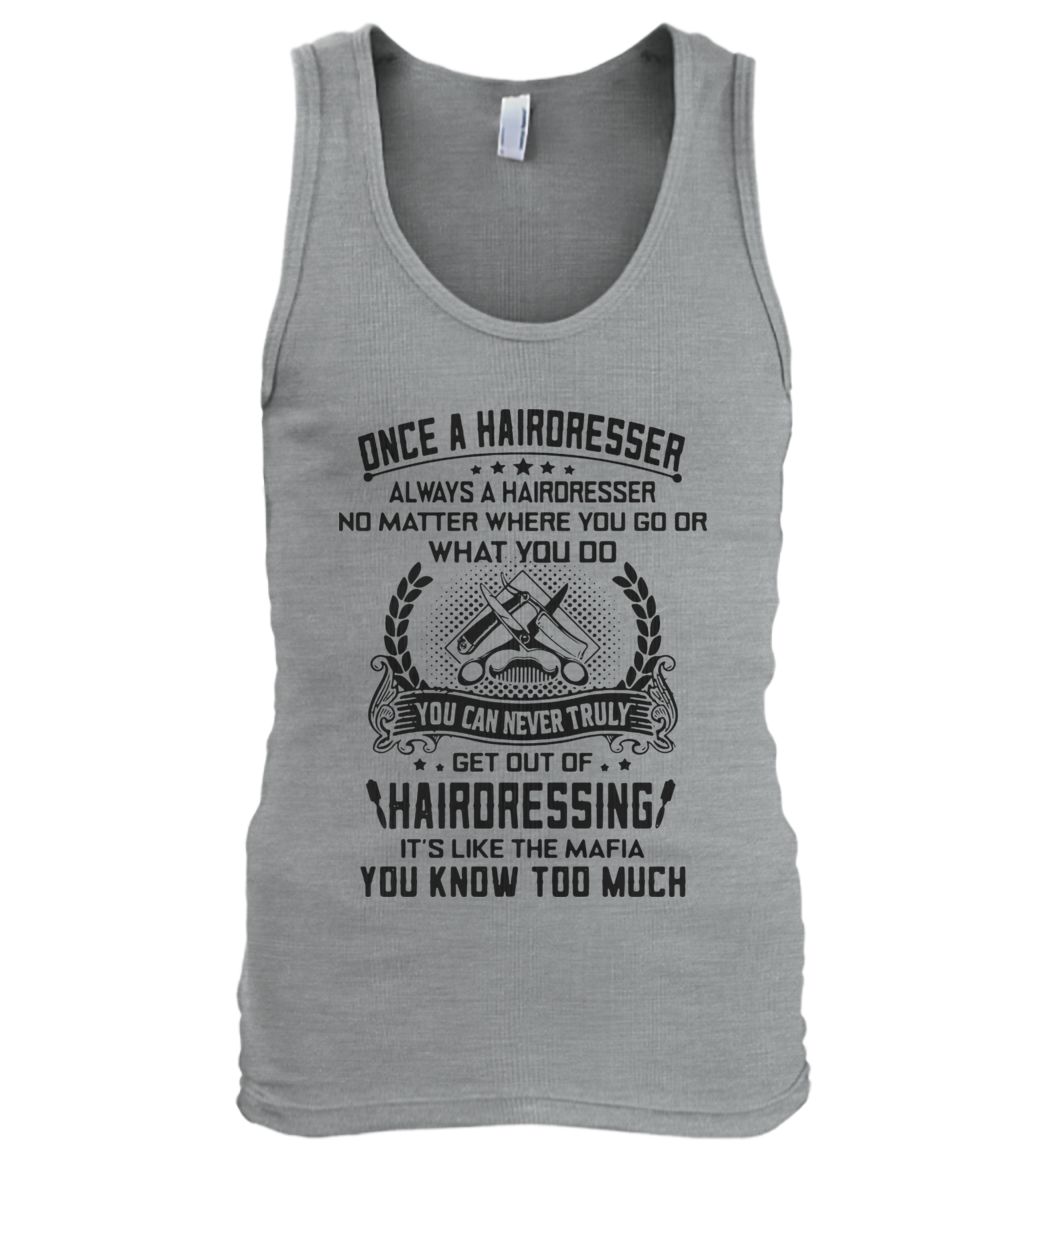 Once a hairdresser always a hairdresser no matter where you go or what you do you men's tank top